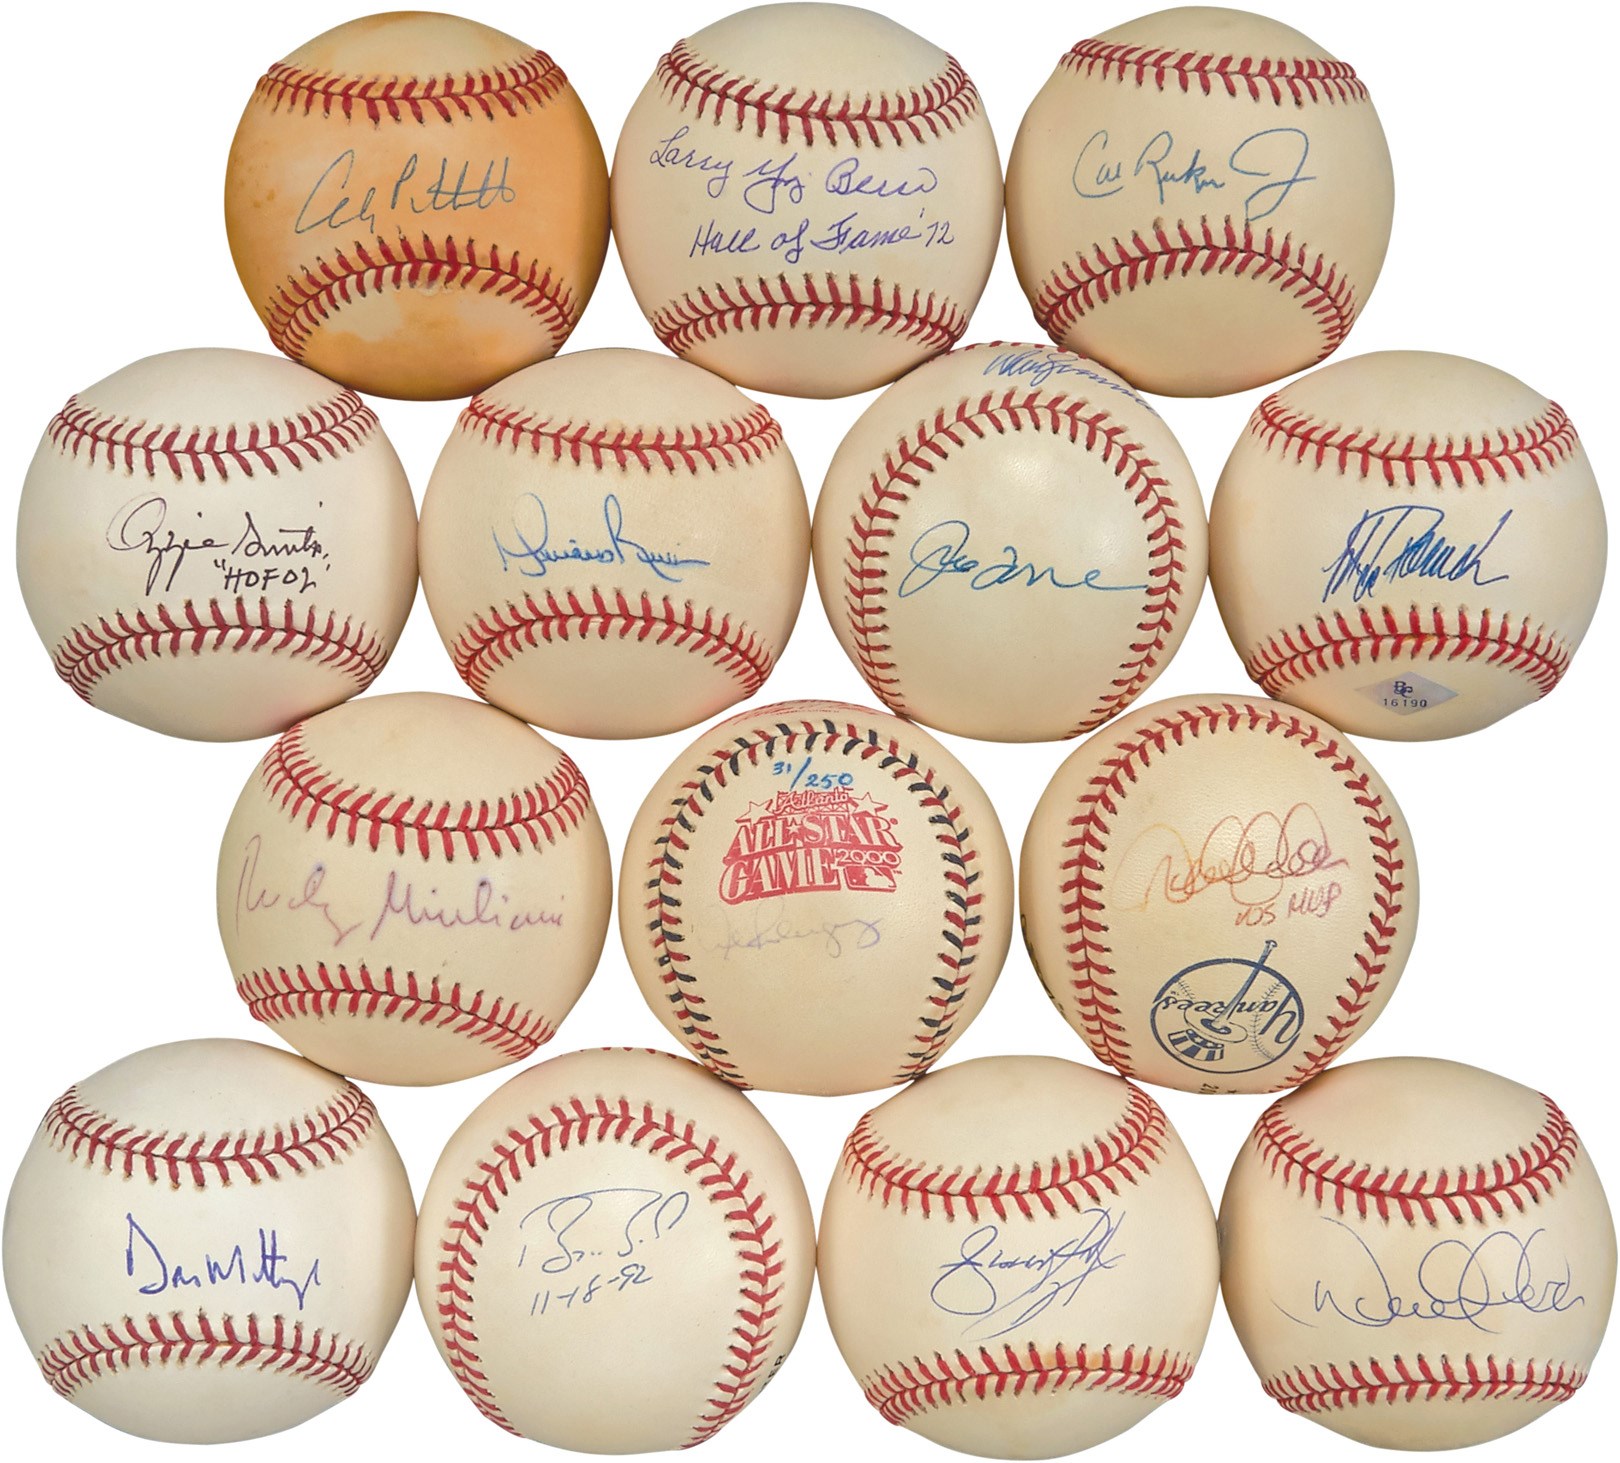 NY Yankees, Giants & Mets - Yankee Legends and Baseball Stars Signed Baseball Collection with (3) Jeters (35+)